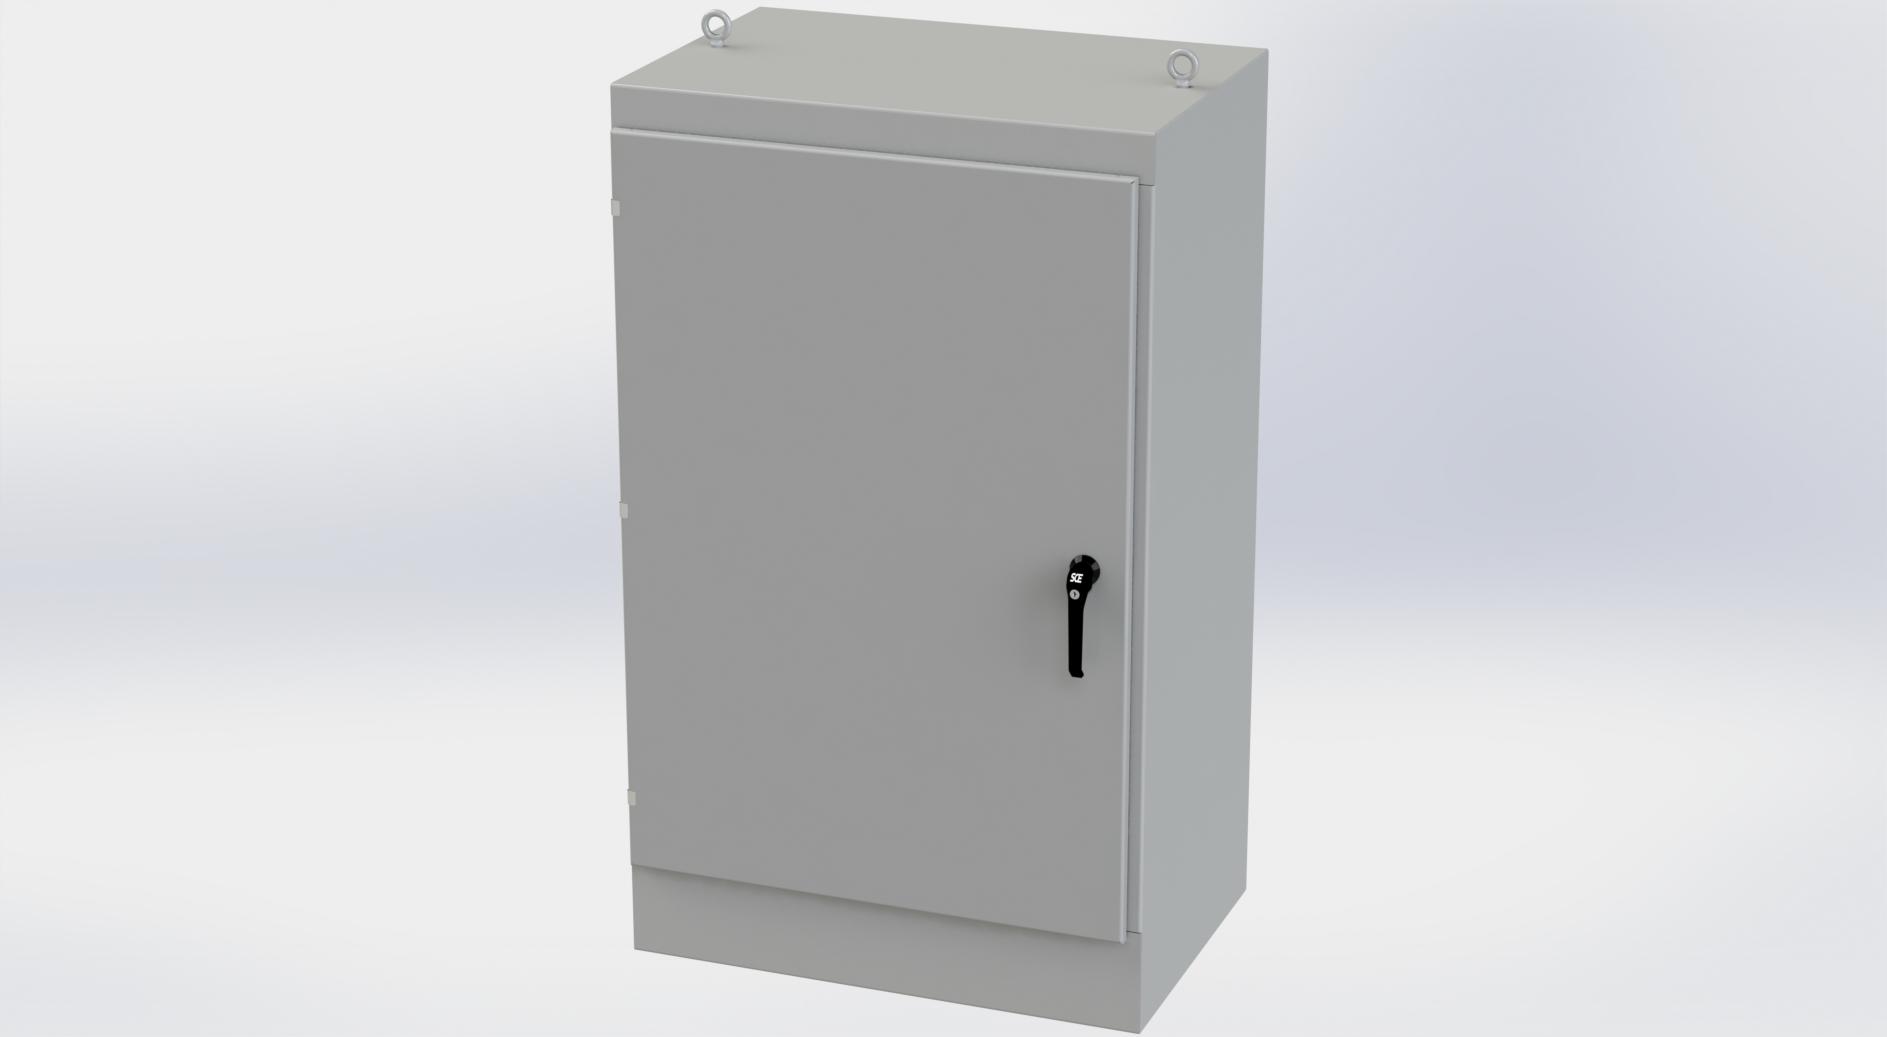 Saginaw Control SCE-603624FS FS Enclosure, Height:60.00", Width:36.00", Depth:24.00", ANSI-61 gray powder coat inside and out. Optional sub-panels are powder coated white.